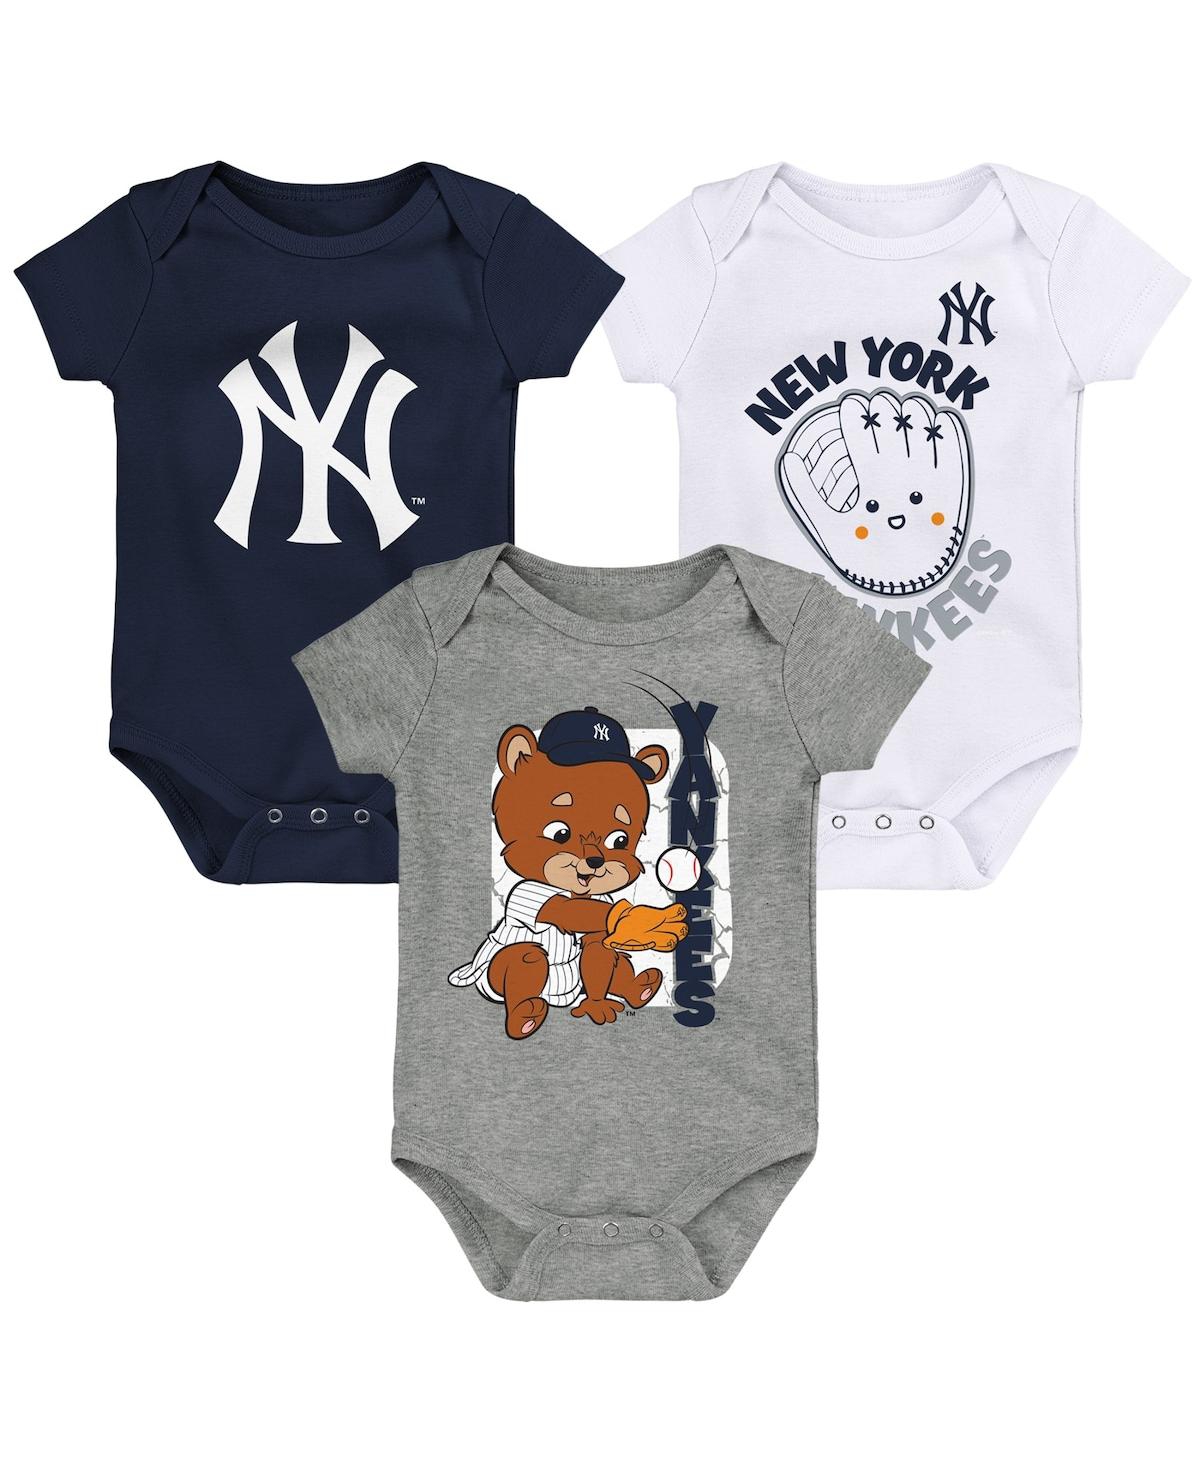 Outerstuff Babies' Newborn And Infant Boys And Girls Navy, White, Gray New York Yankees Change Up 3-pack Bodysuit Set In Navy,white,gray